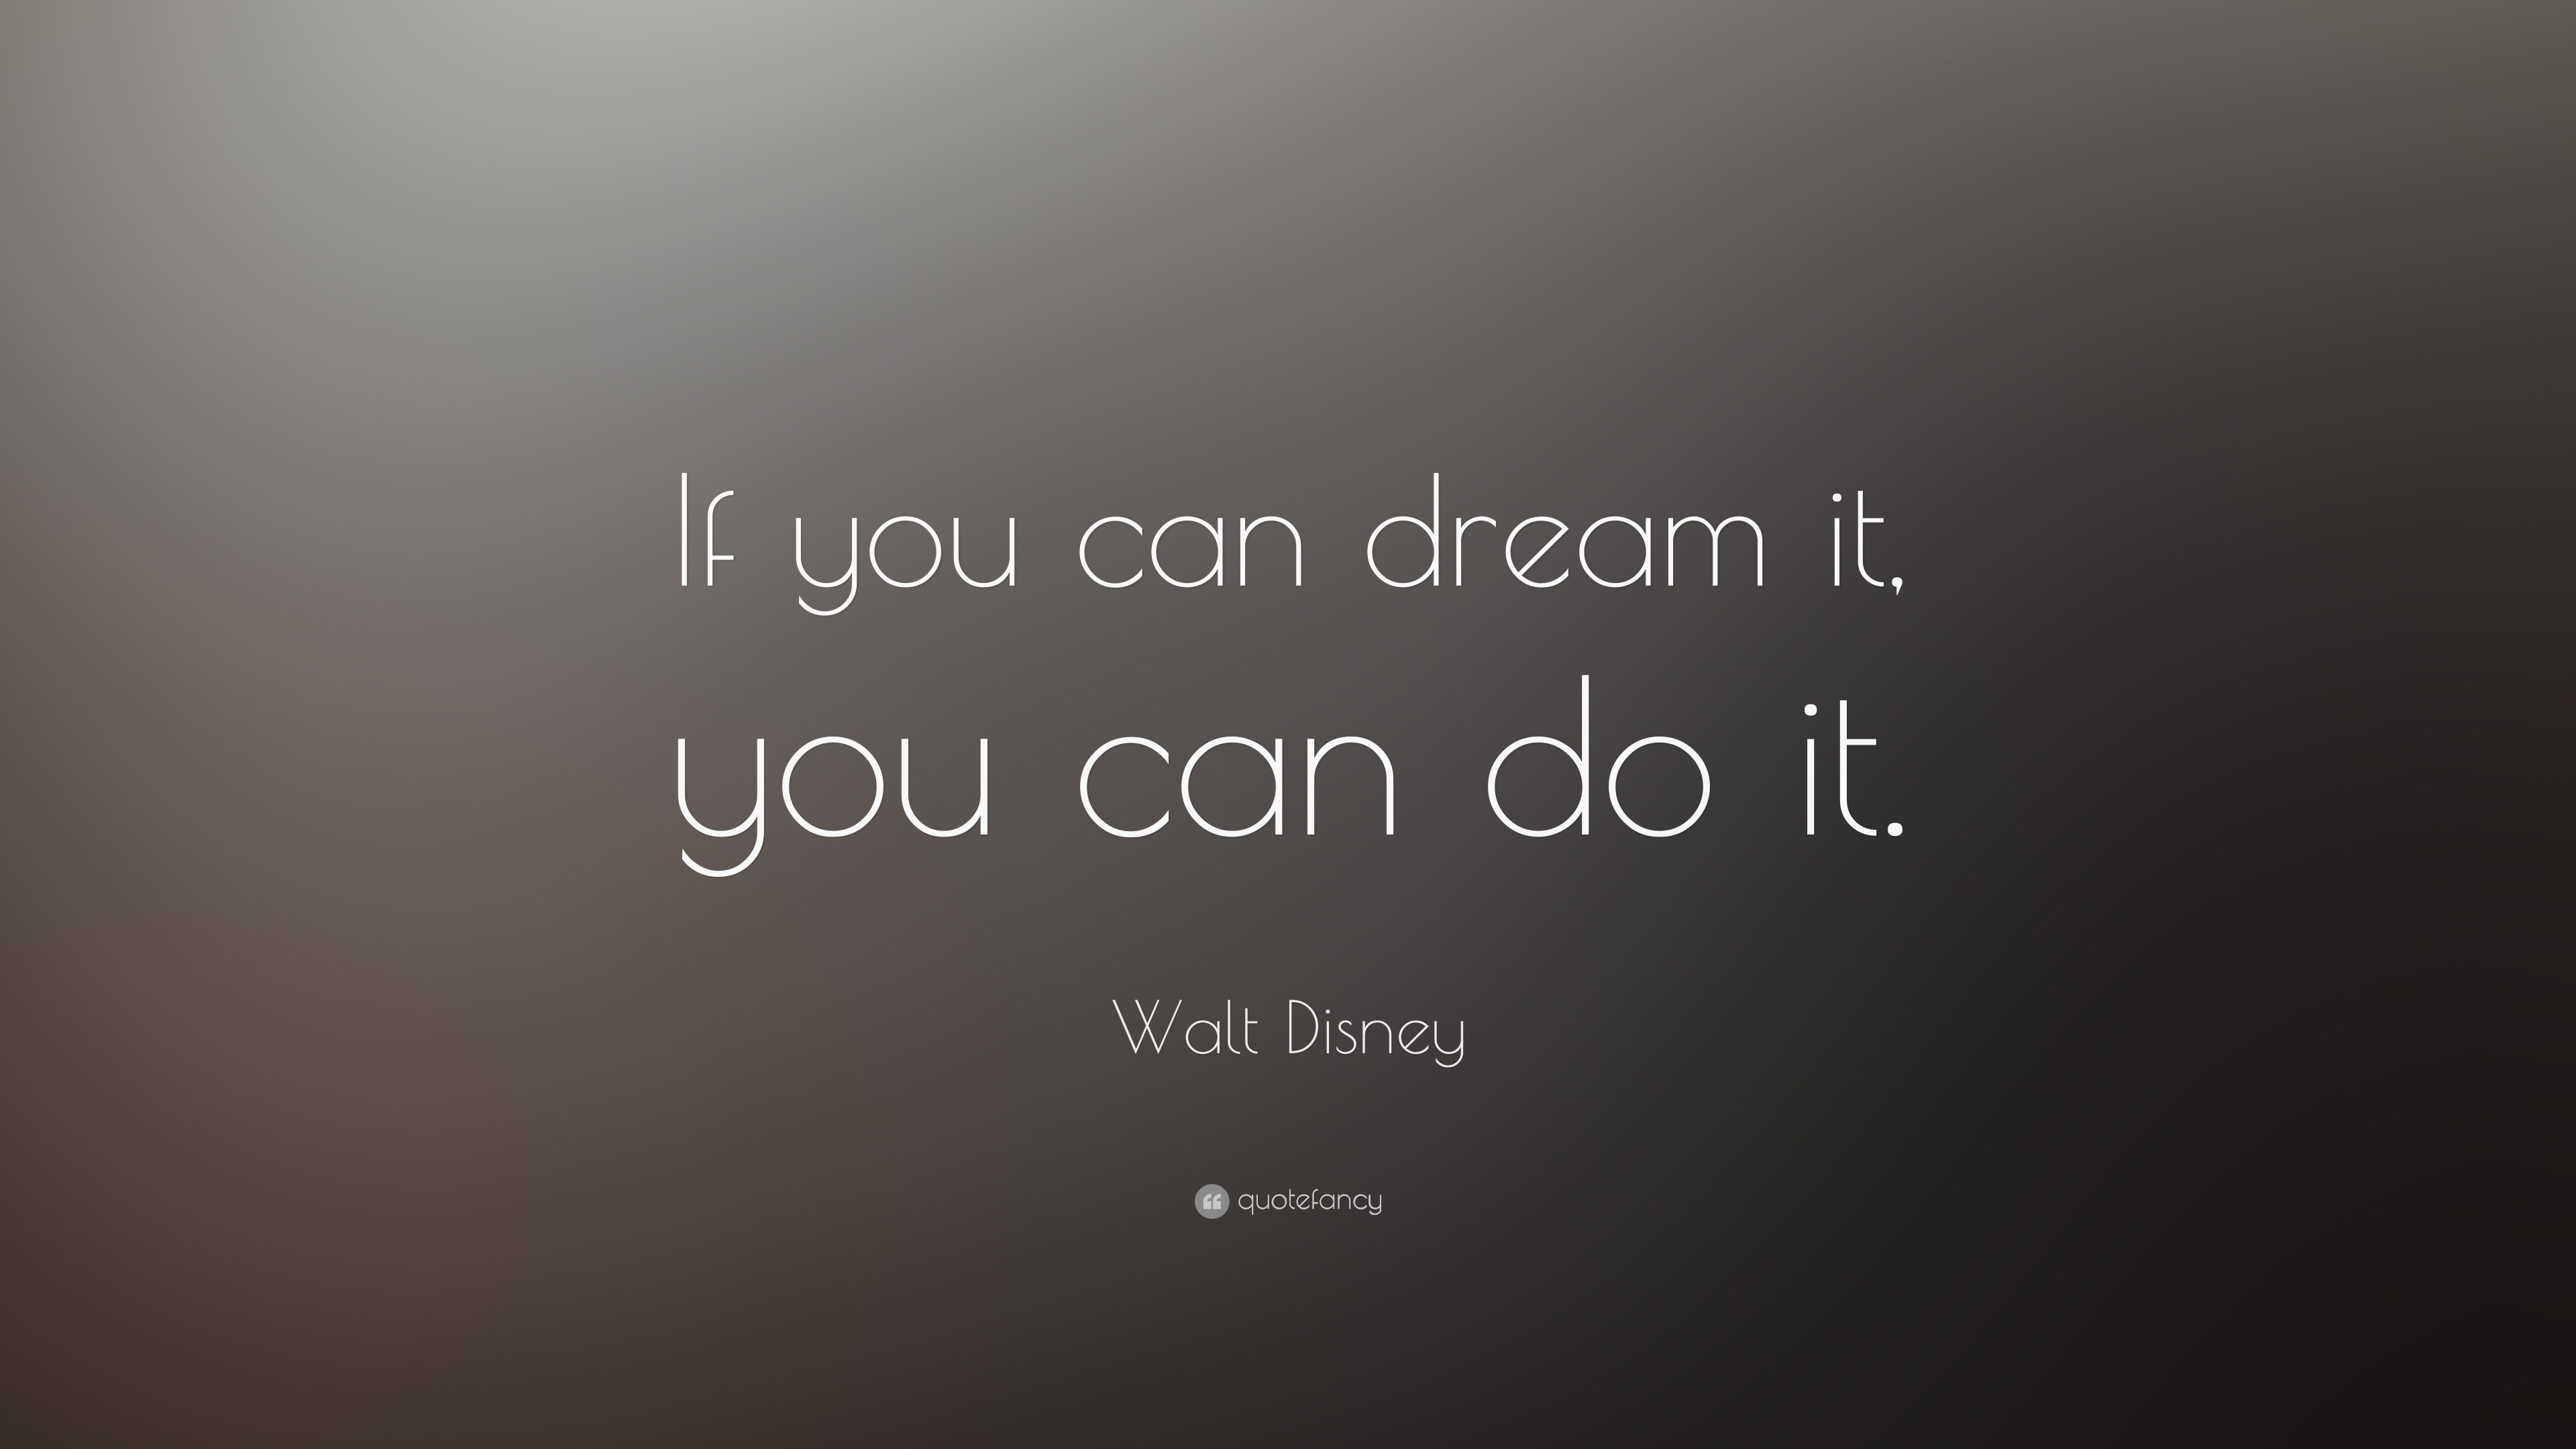 Walt Disney Quote: "If you can dream it, you can do it. 